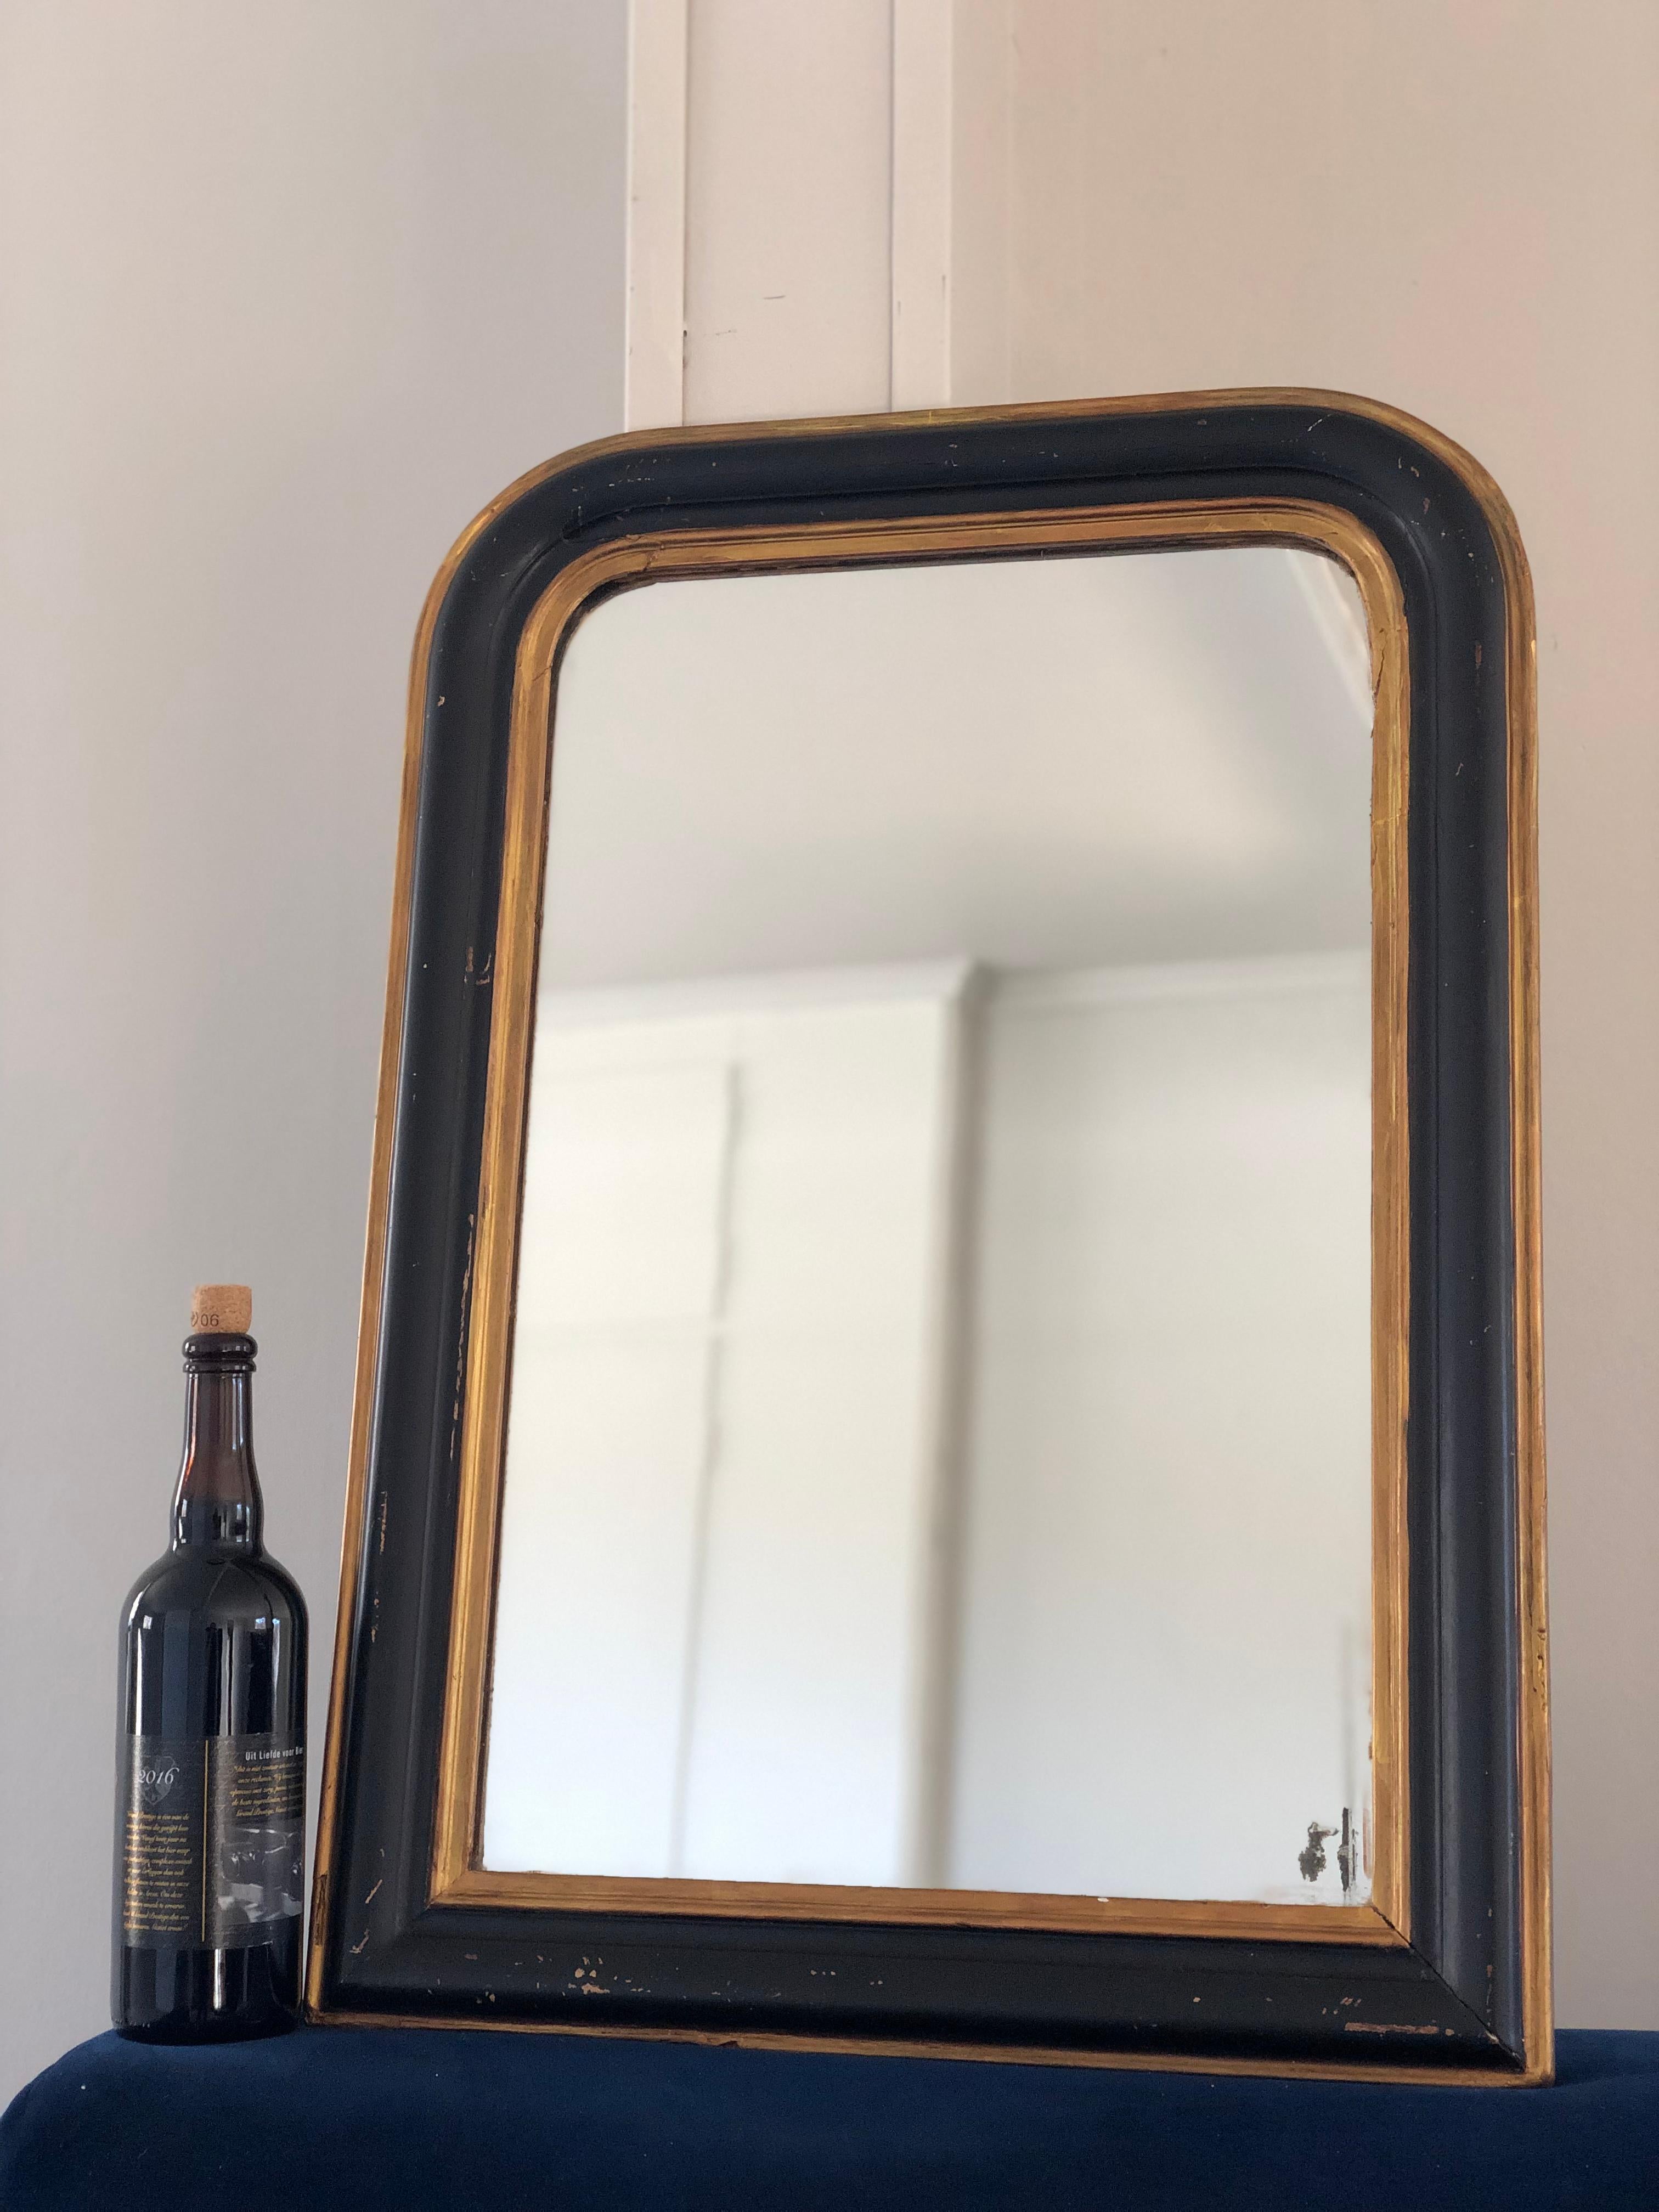  Antique Louis Philippe Mirror In Black and Gold France Late 19th Century 72/140 In Good Condition For Sale In Bjuråker, SE